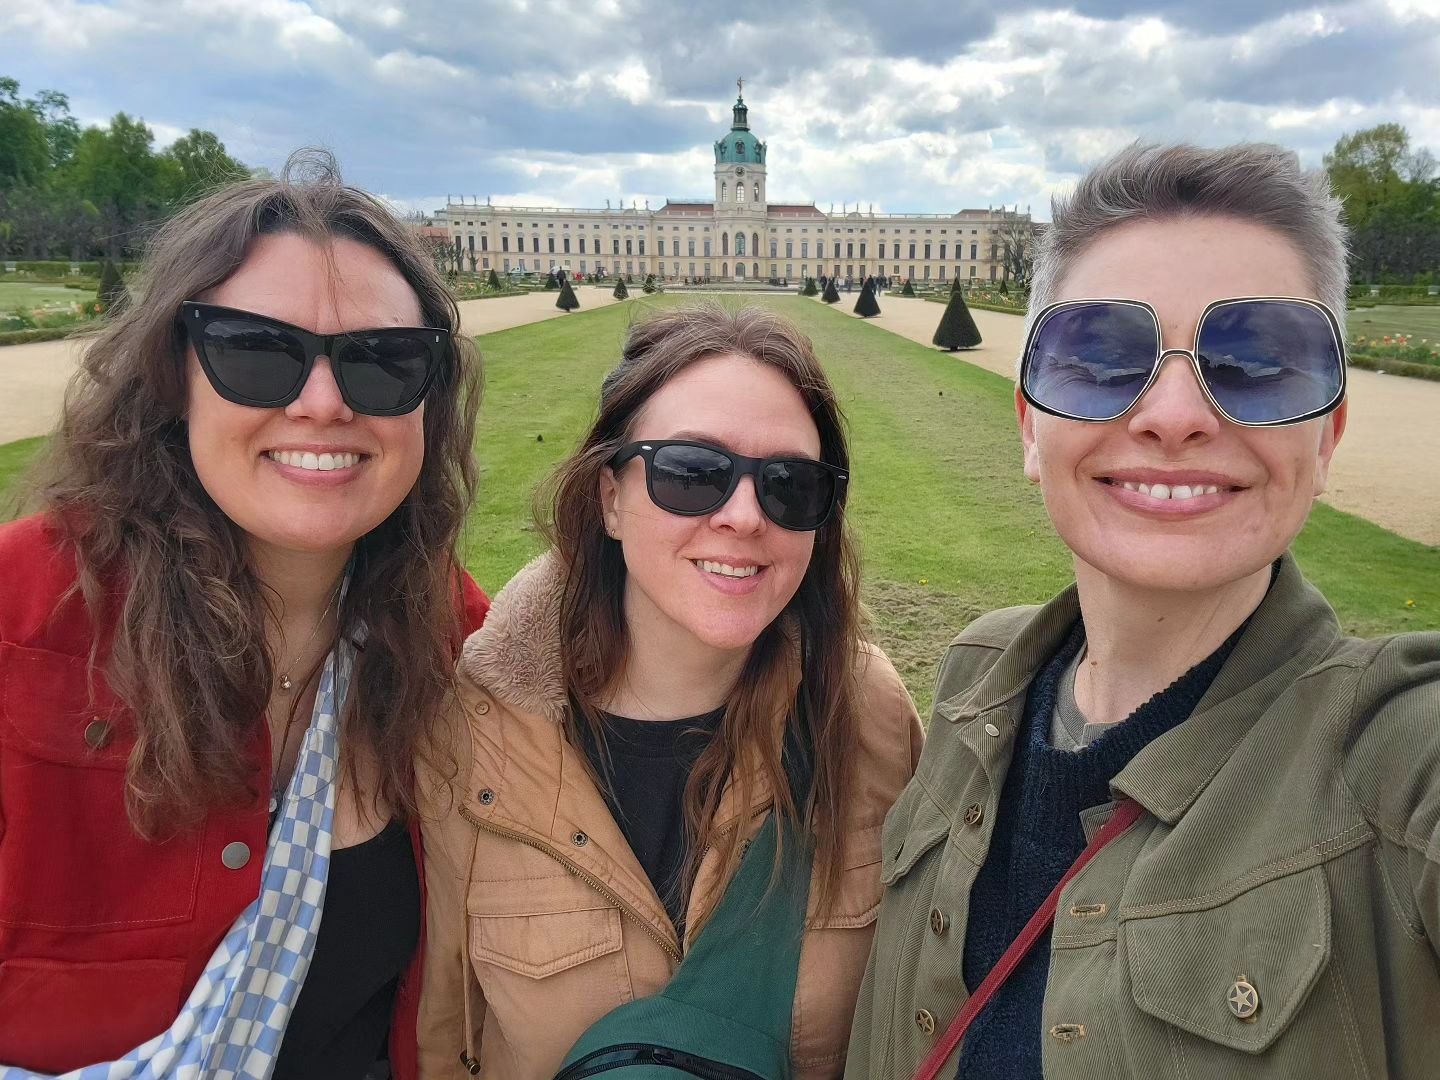 24 hrs in Berlin so far and we've selfied in front of palaces, drank beers in the sunshine, Laura found a new boyfriend, and I found my hair doppelganger bust! Doesn't get much better!